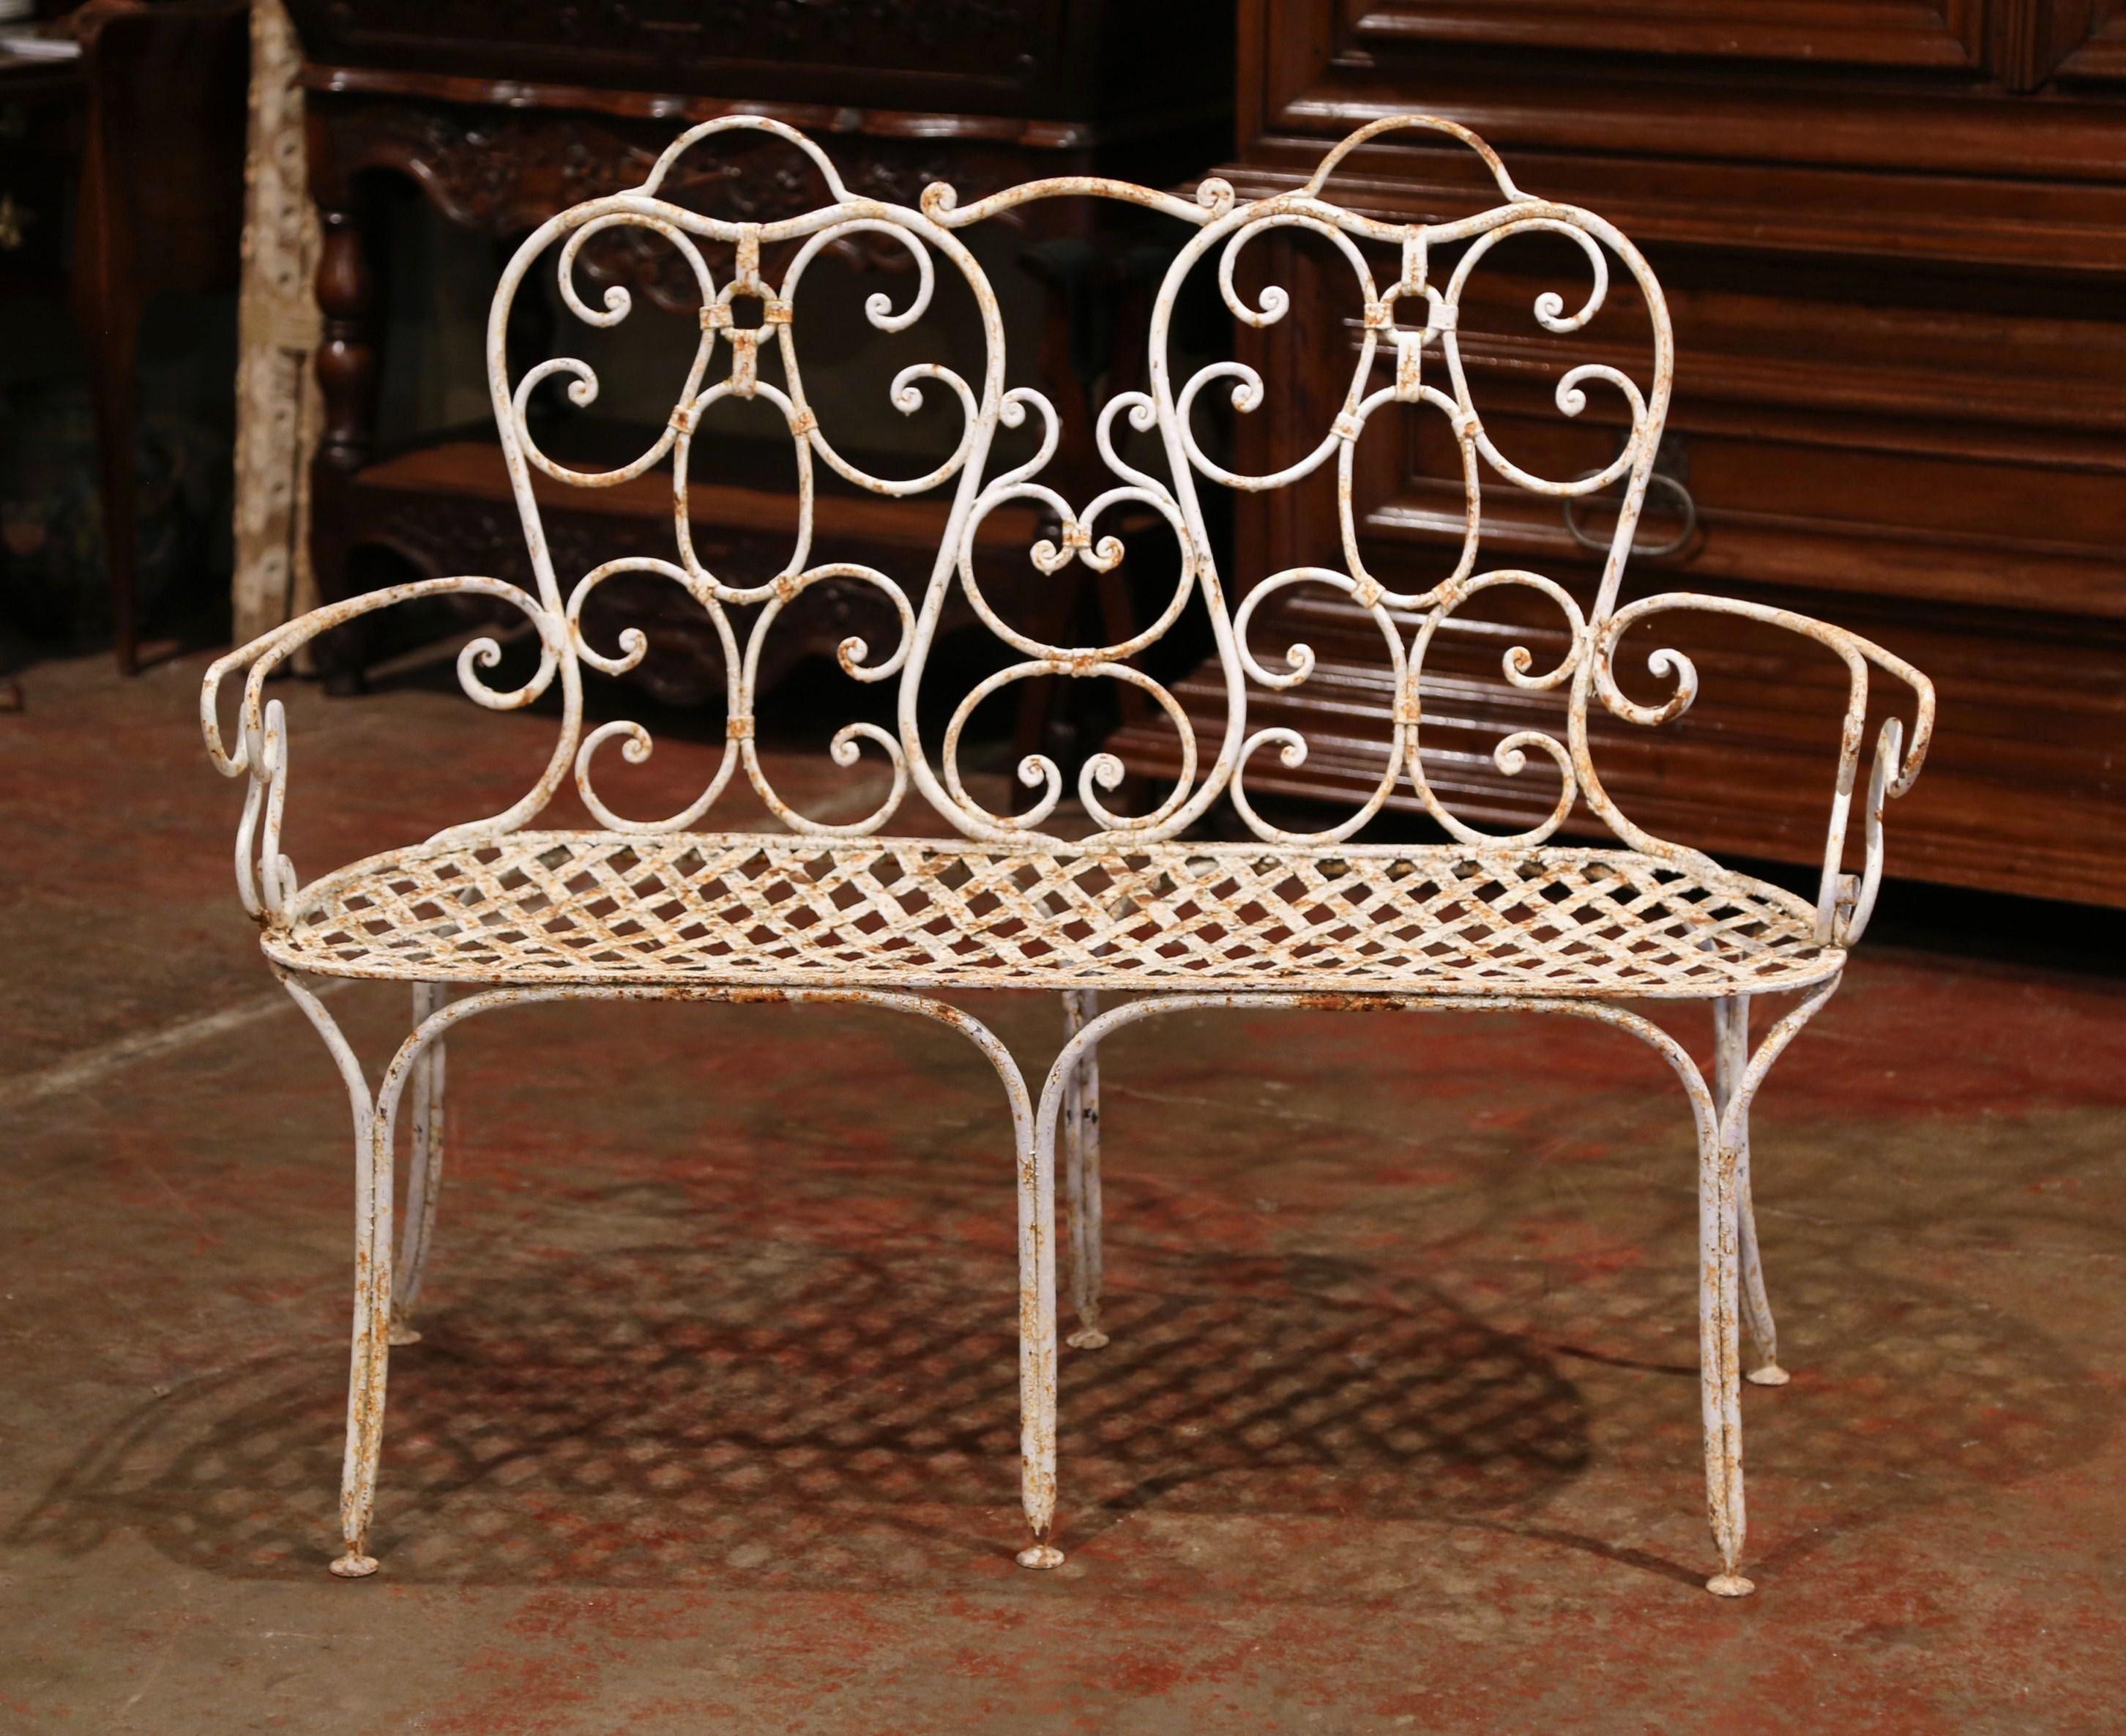 Louis XV 19th Century French Scroll Painted Iron Six-Leg Garden Bench from Normandy